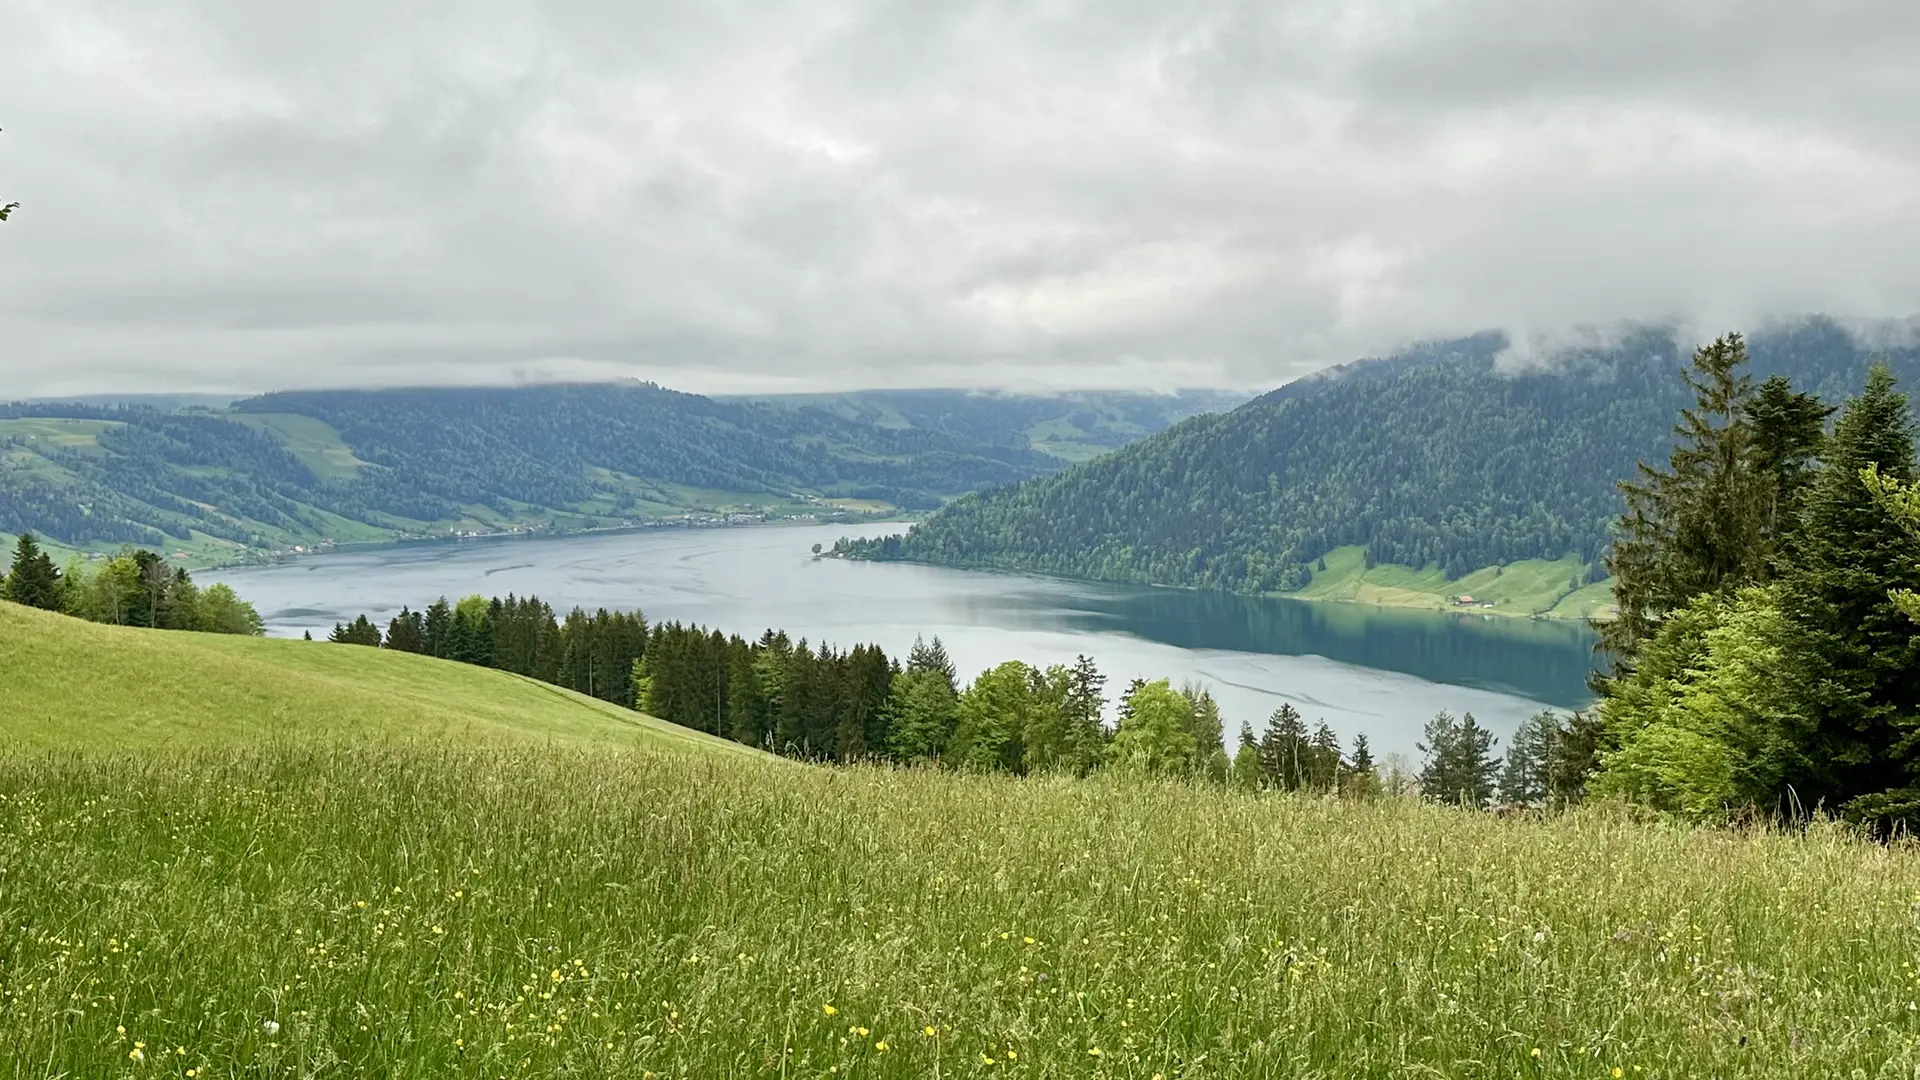 View of a lake on an overcast day. Green pasture dotted with yellow flowers is in the foreground and dark green forested hills in the background. The sky is completely covered in clouds.